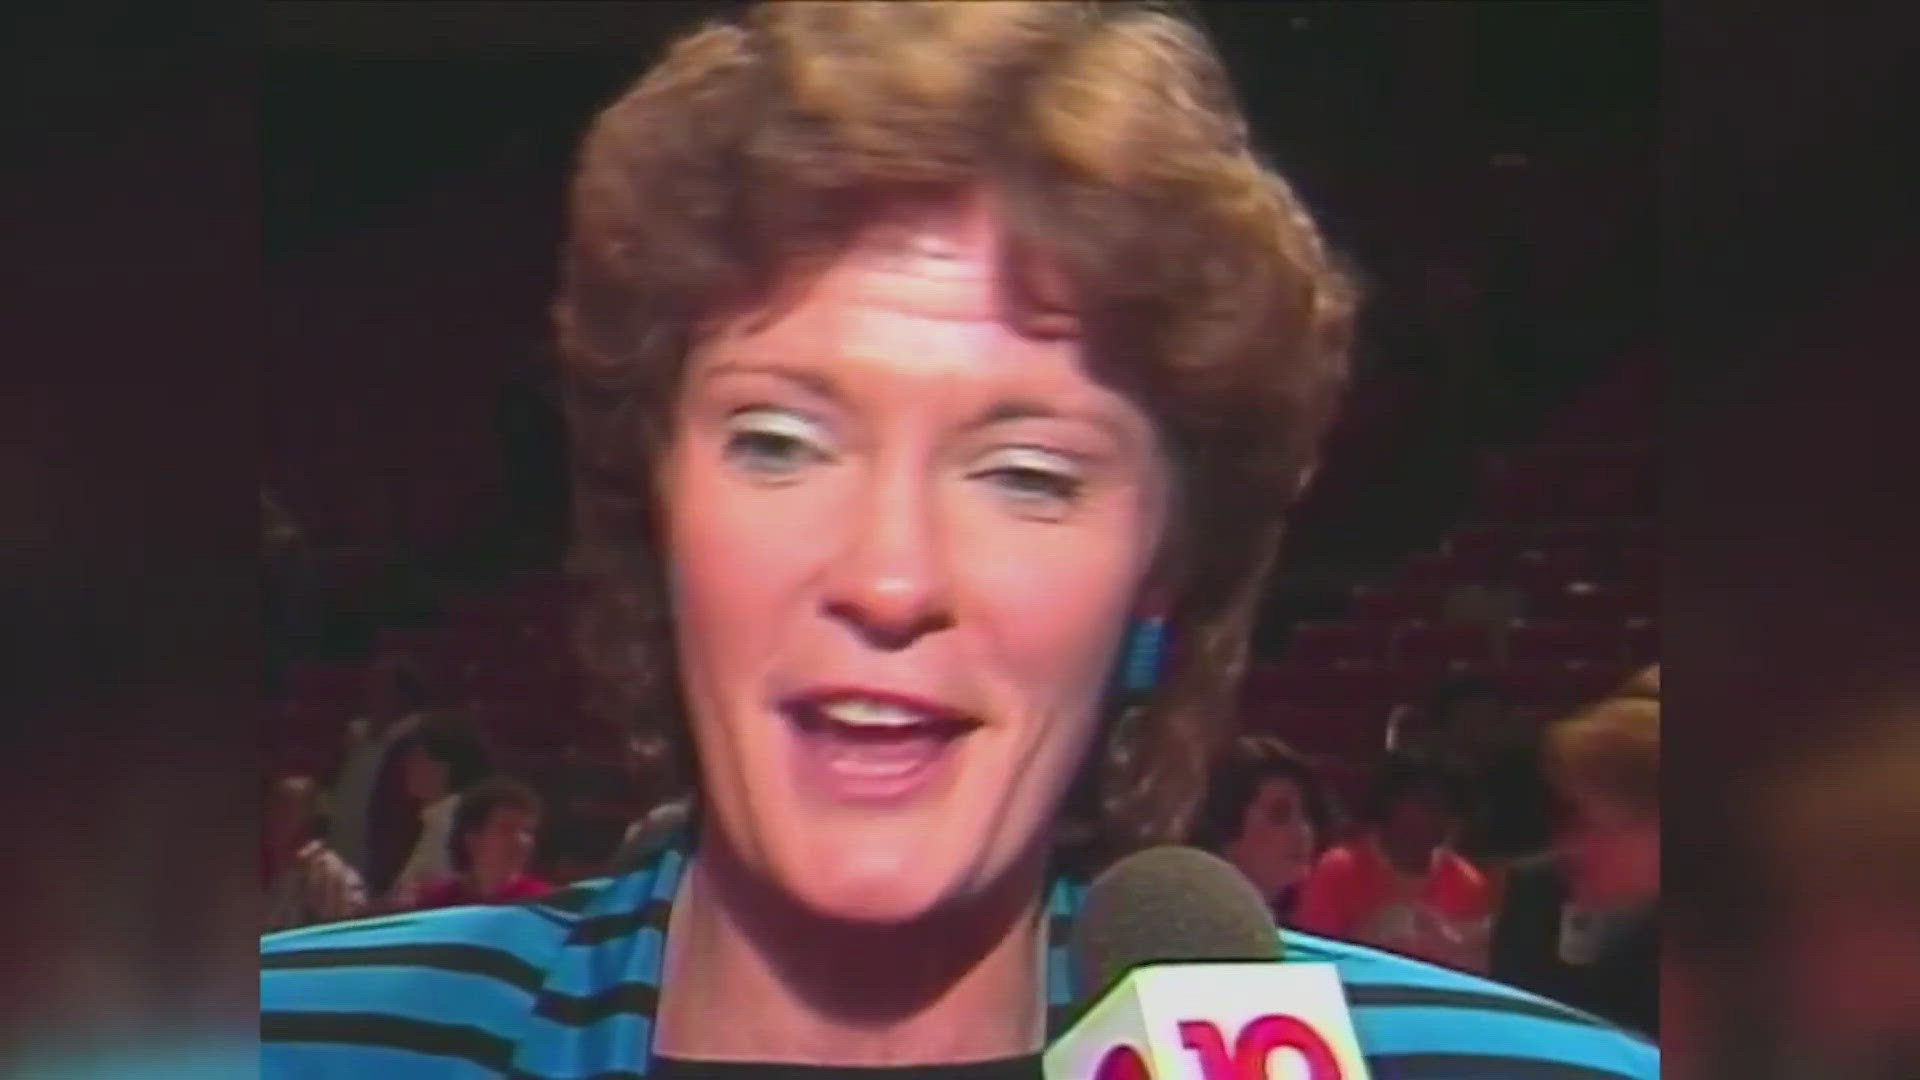 The Lady Vols head coach passed away from Alzheimer's complications in 2016.